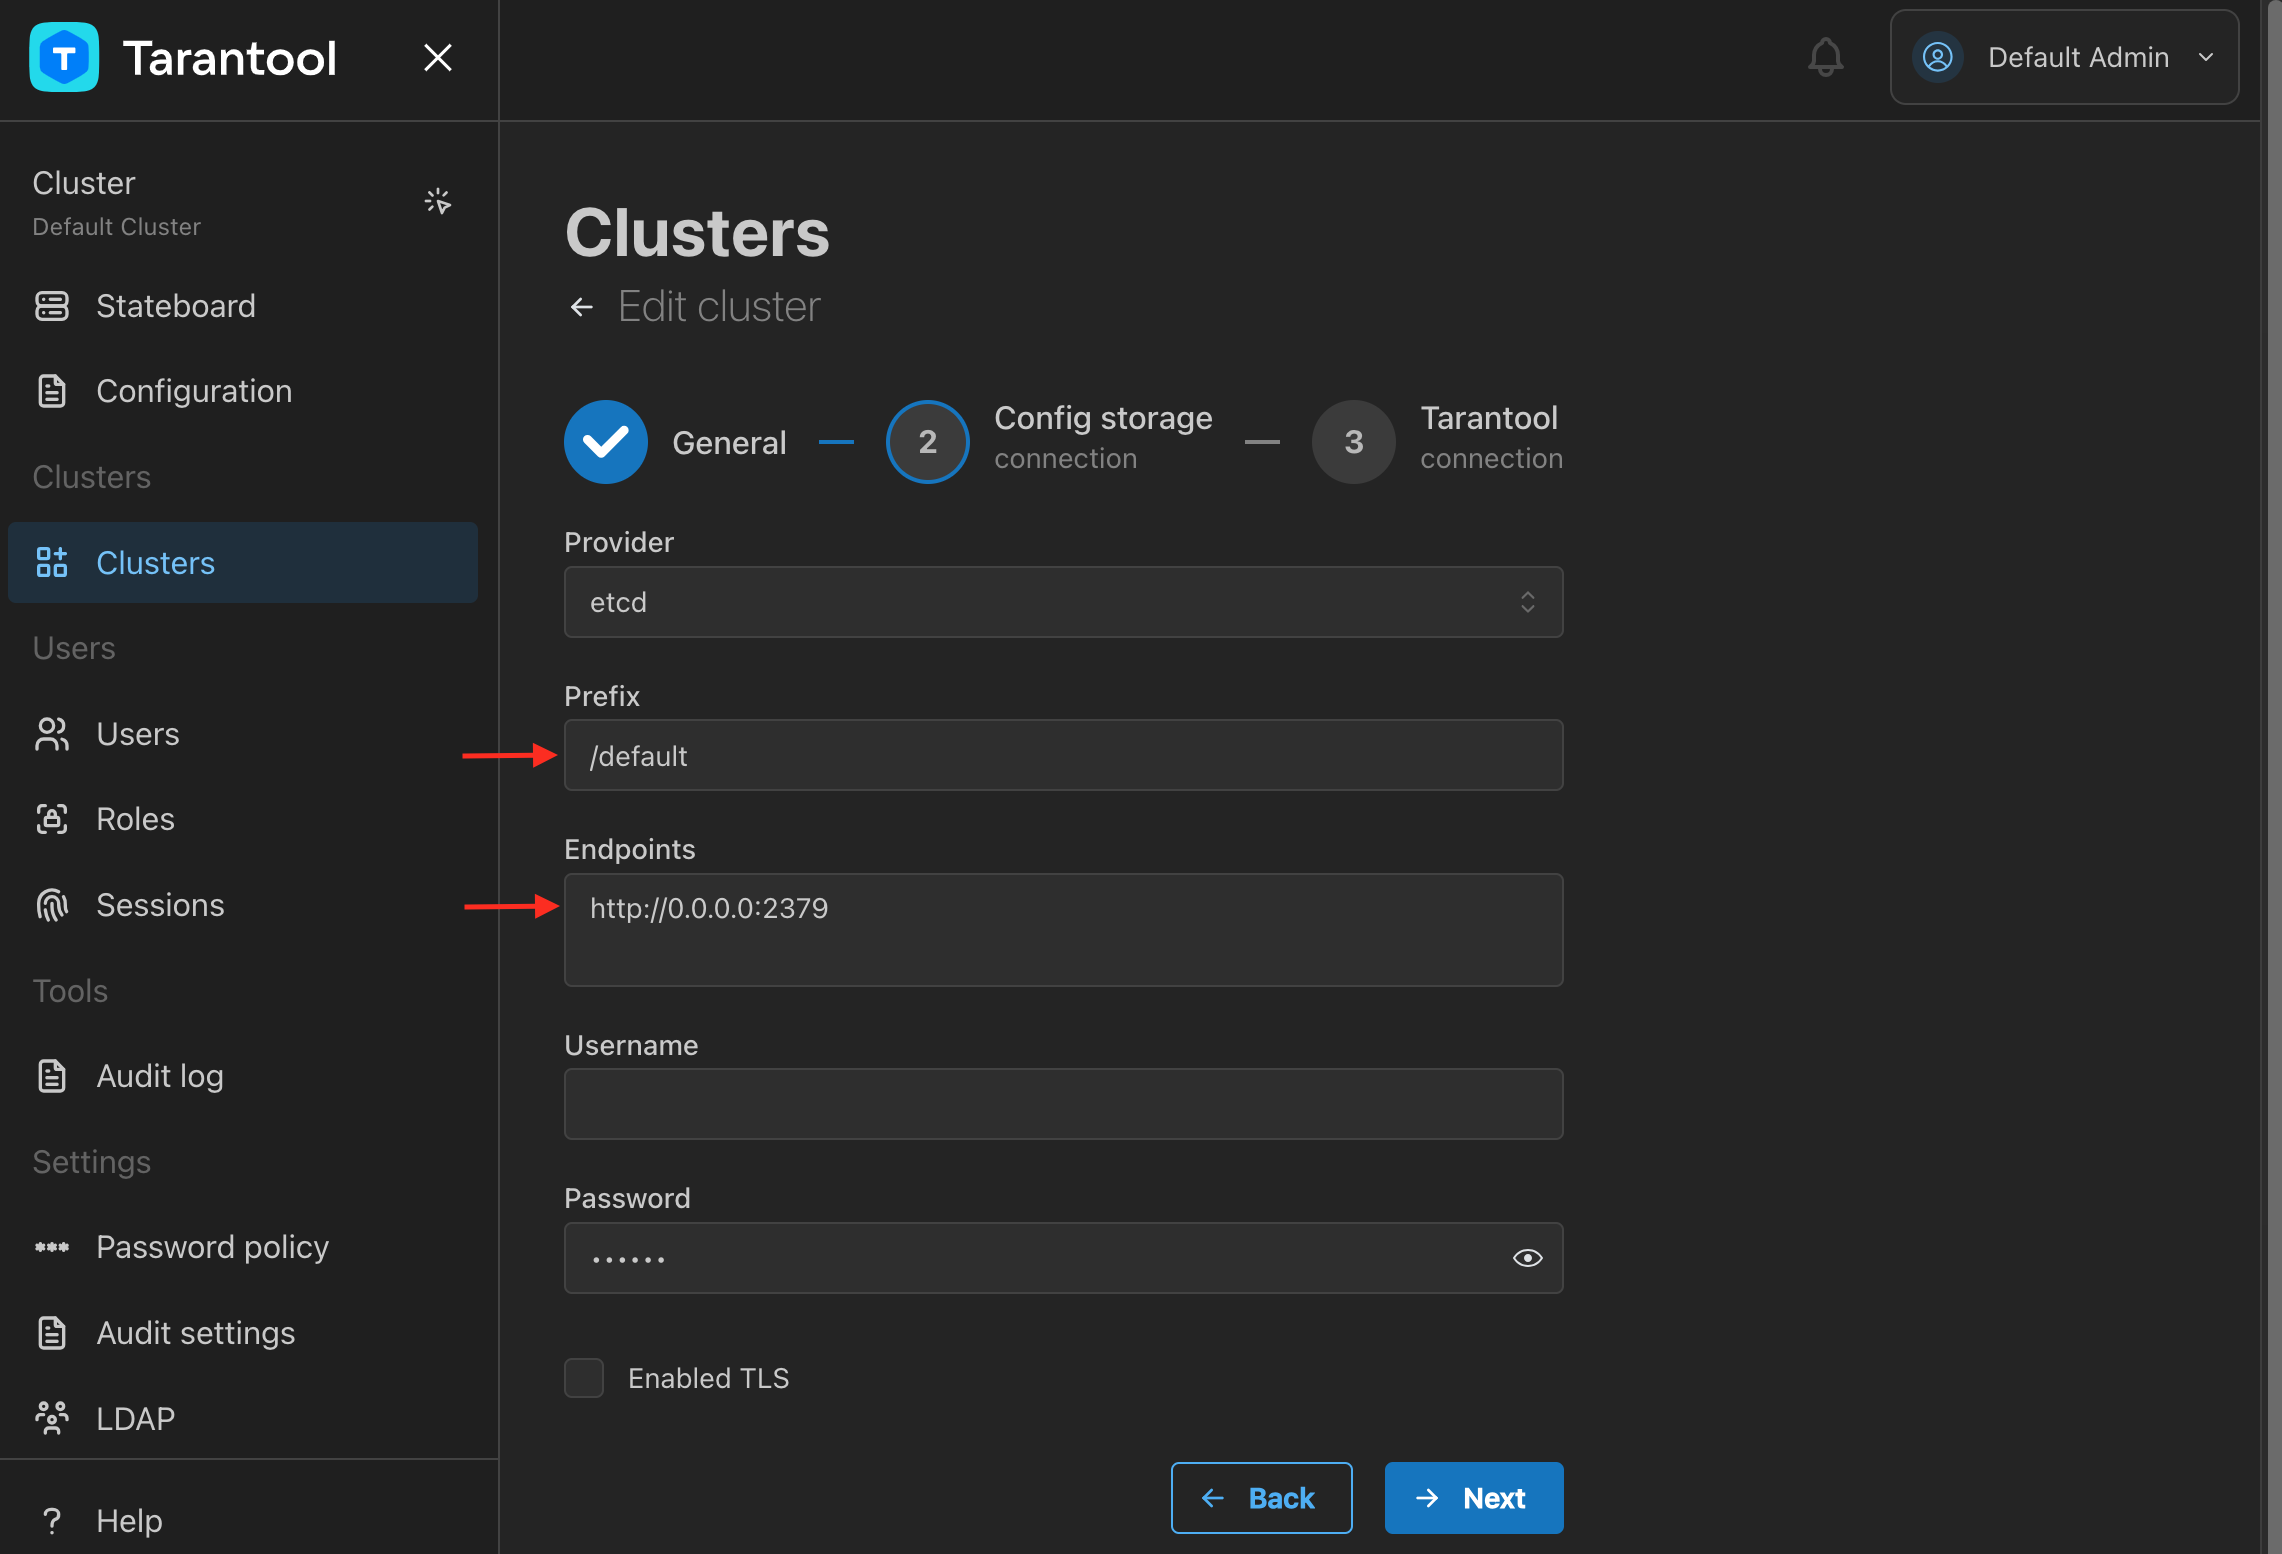 Cluster configuration storage settings